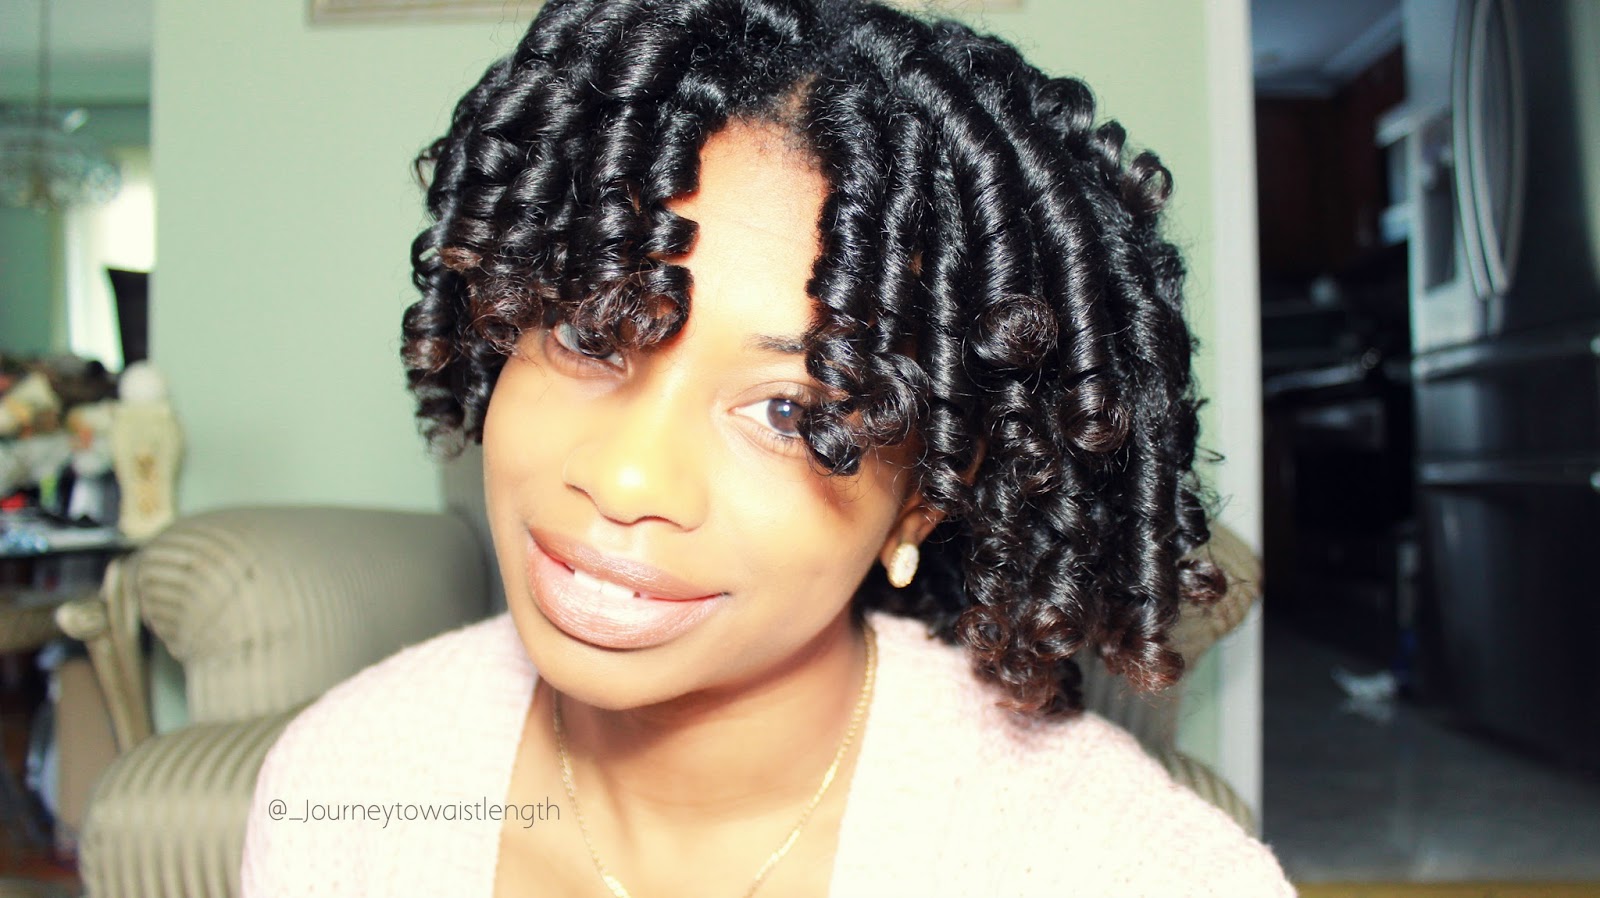 Flexi Rod Curls On Transitioning Hair Journey To Waist Length